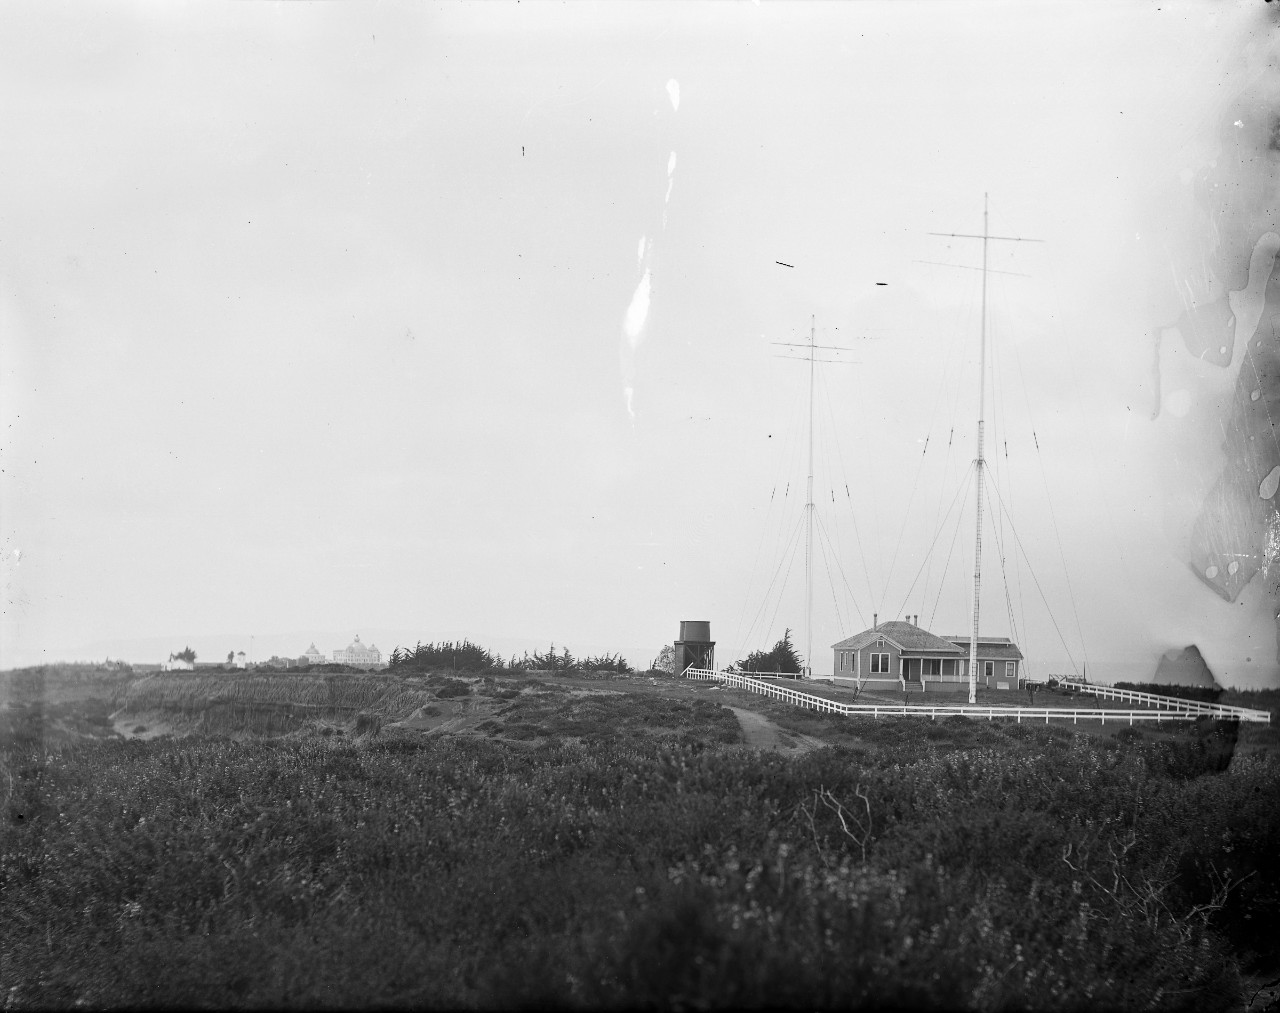 <p>Exterior view of the station building at the Point Loma (San Diego) Naval Radio Station. Image is from UG 21, US Naval California Radio Station Collection.</p>
